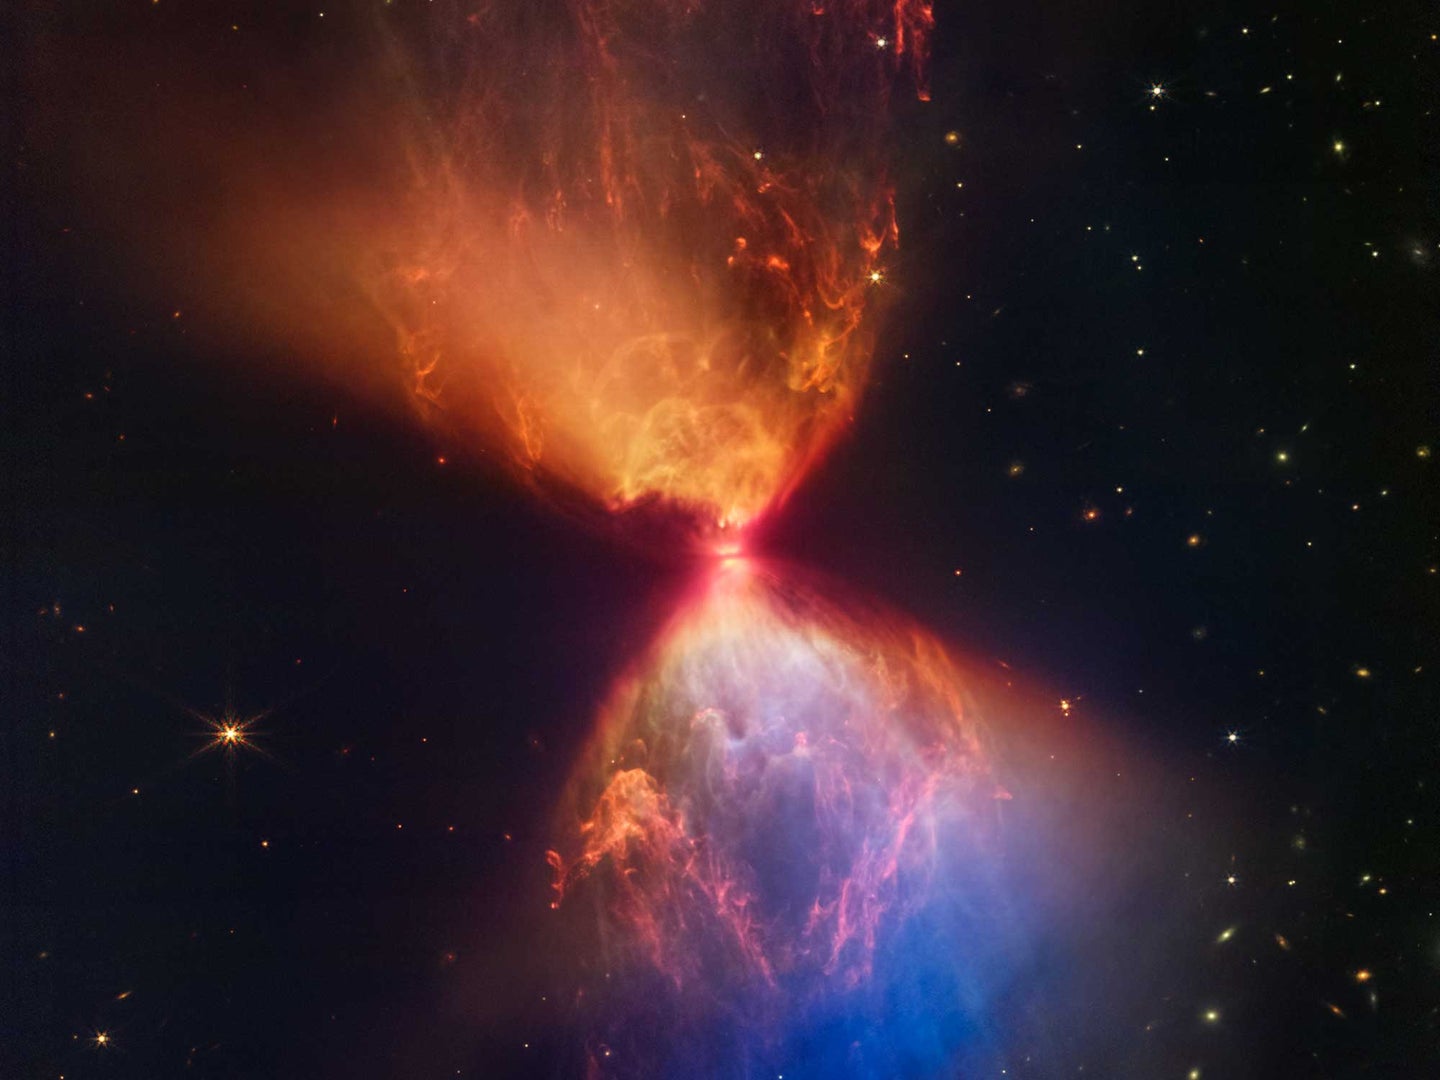 The protostar within the dark cloud L1527, shown in this image from NASA’s James Webb Space Telescope Near-Infrared Camera (NIRCam).